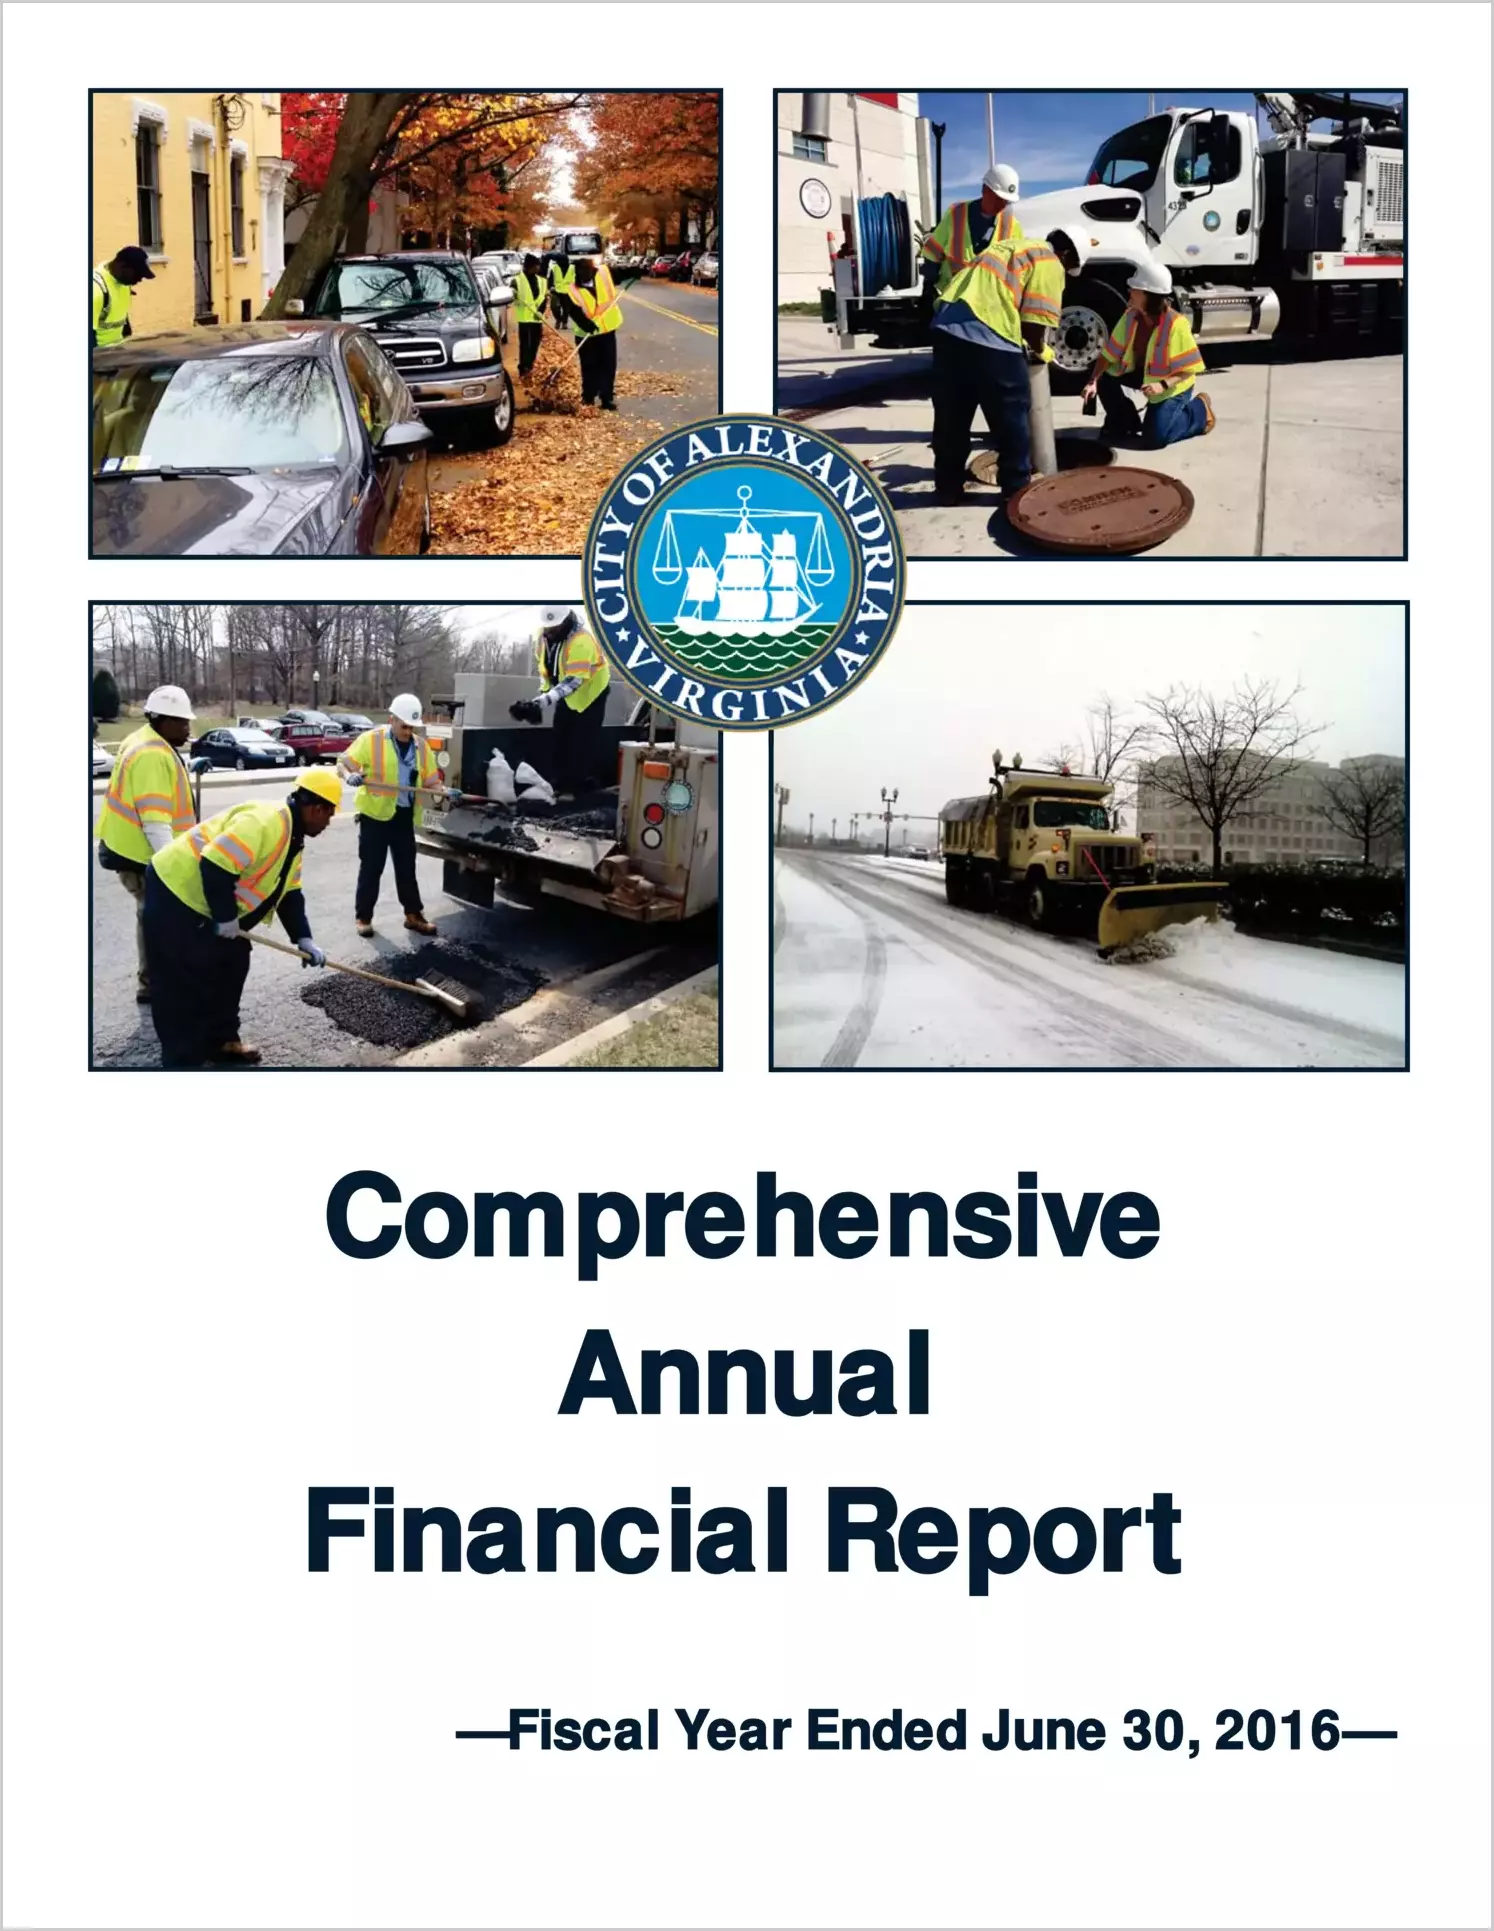 2016 Annual Financial Report for City of Alexandria